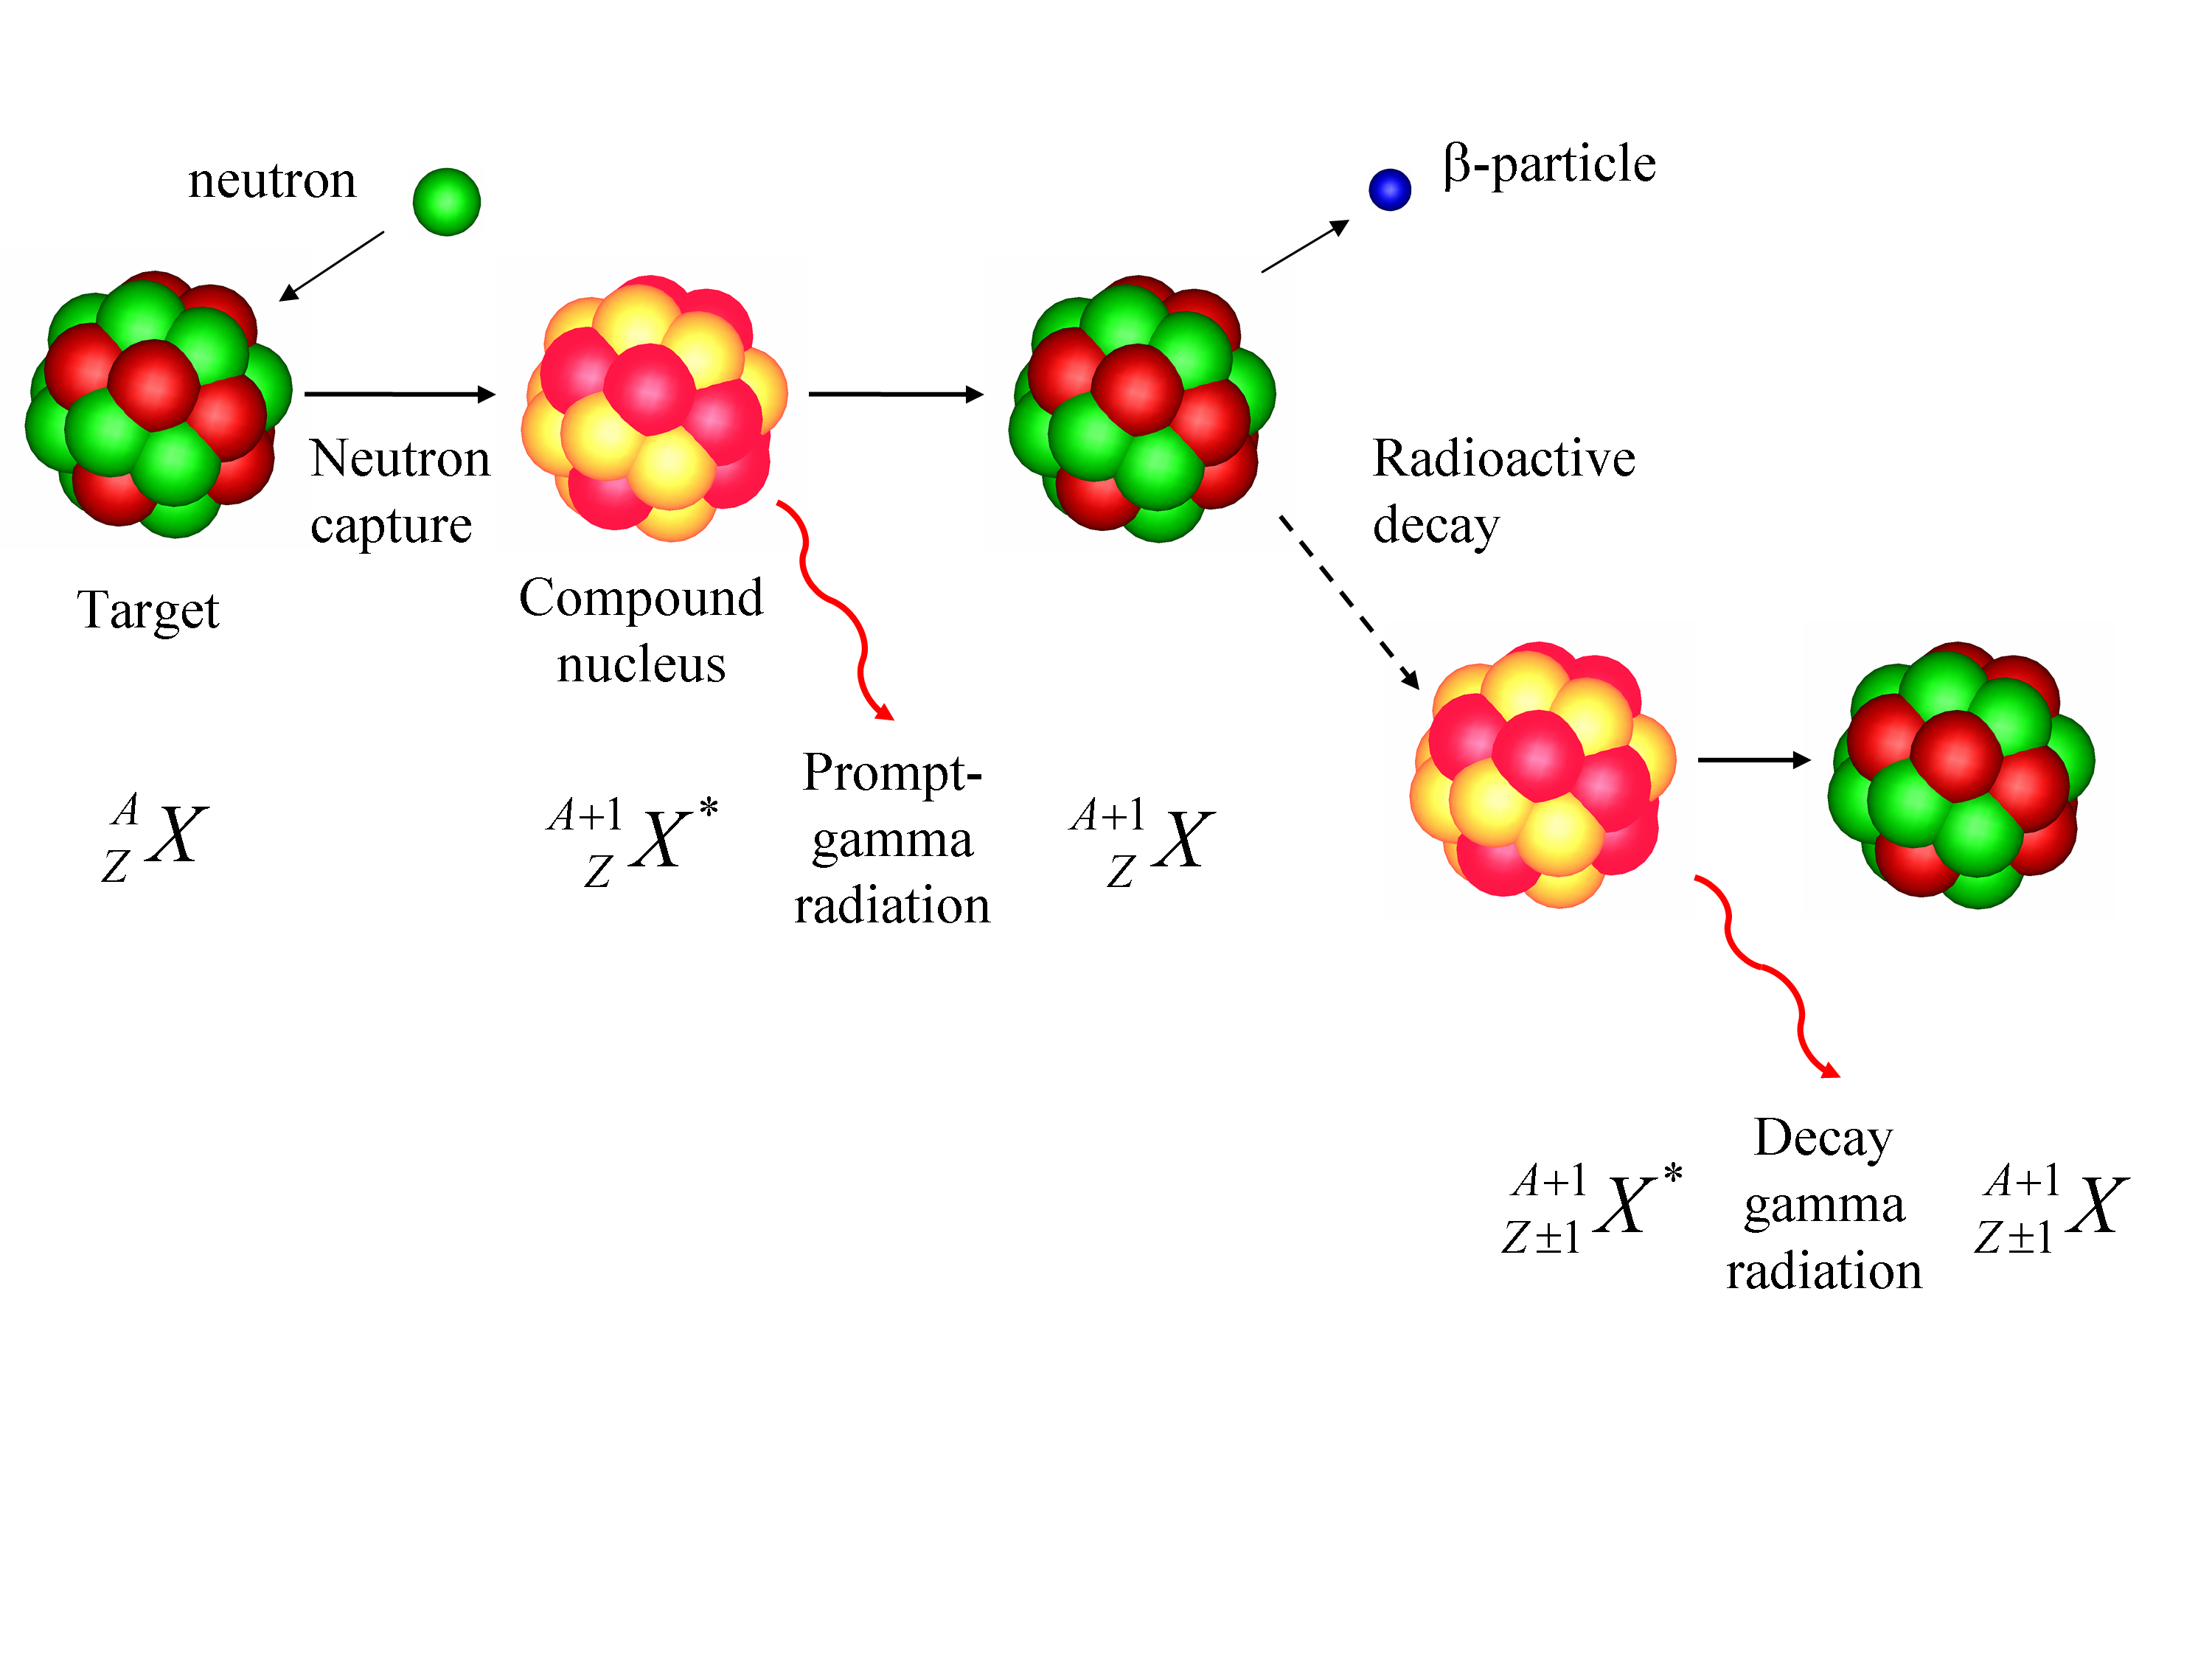 <p>Slow Neutron capture occurs in red giants. This occurs over a long period of time when there is low neutron density and intermediate stellar temps. Heavier elements can be created over a long period of time. Beta decay is more likely than neutron capture.</p>